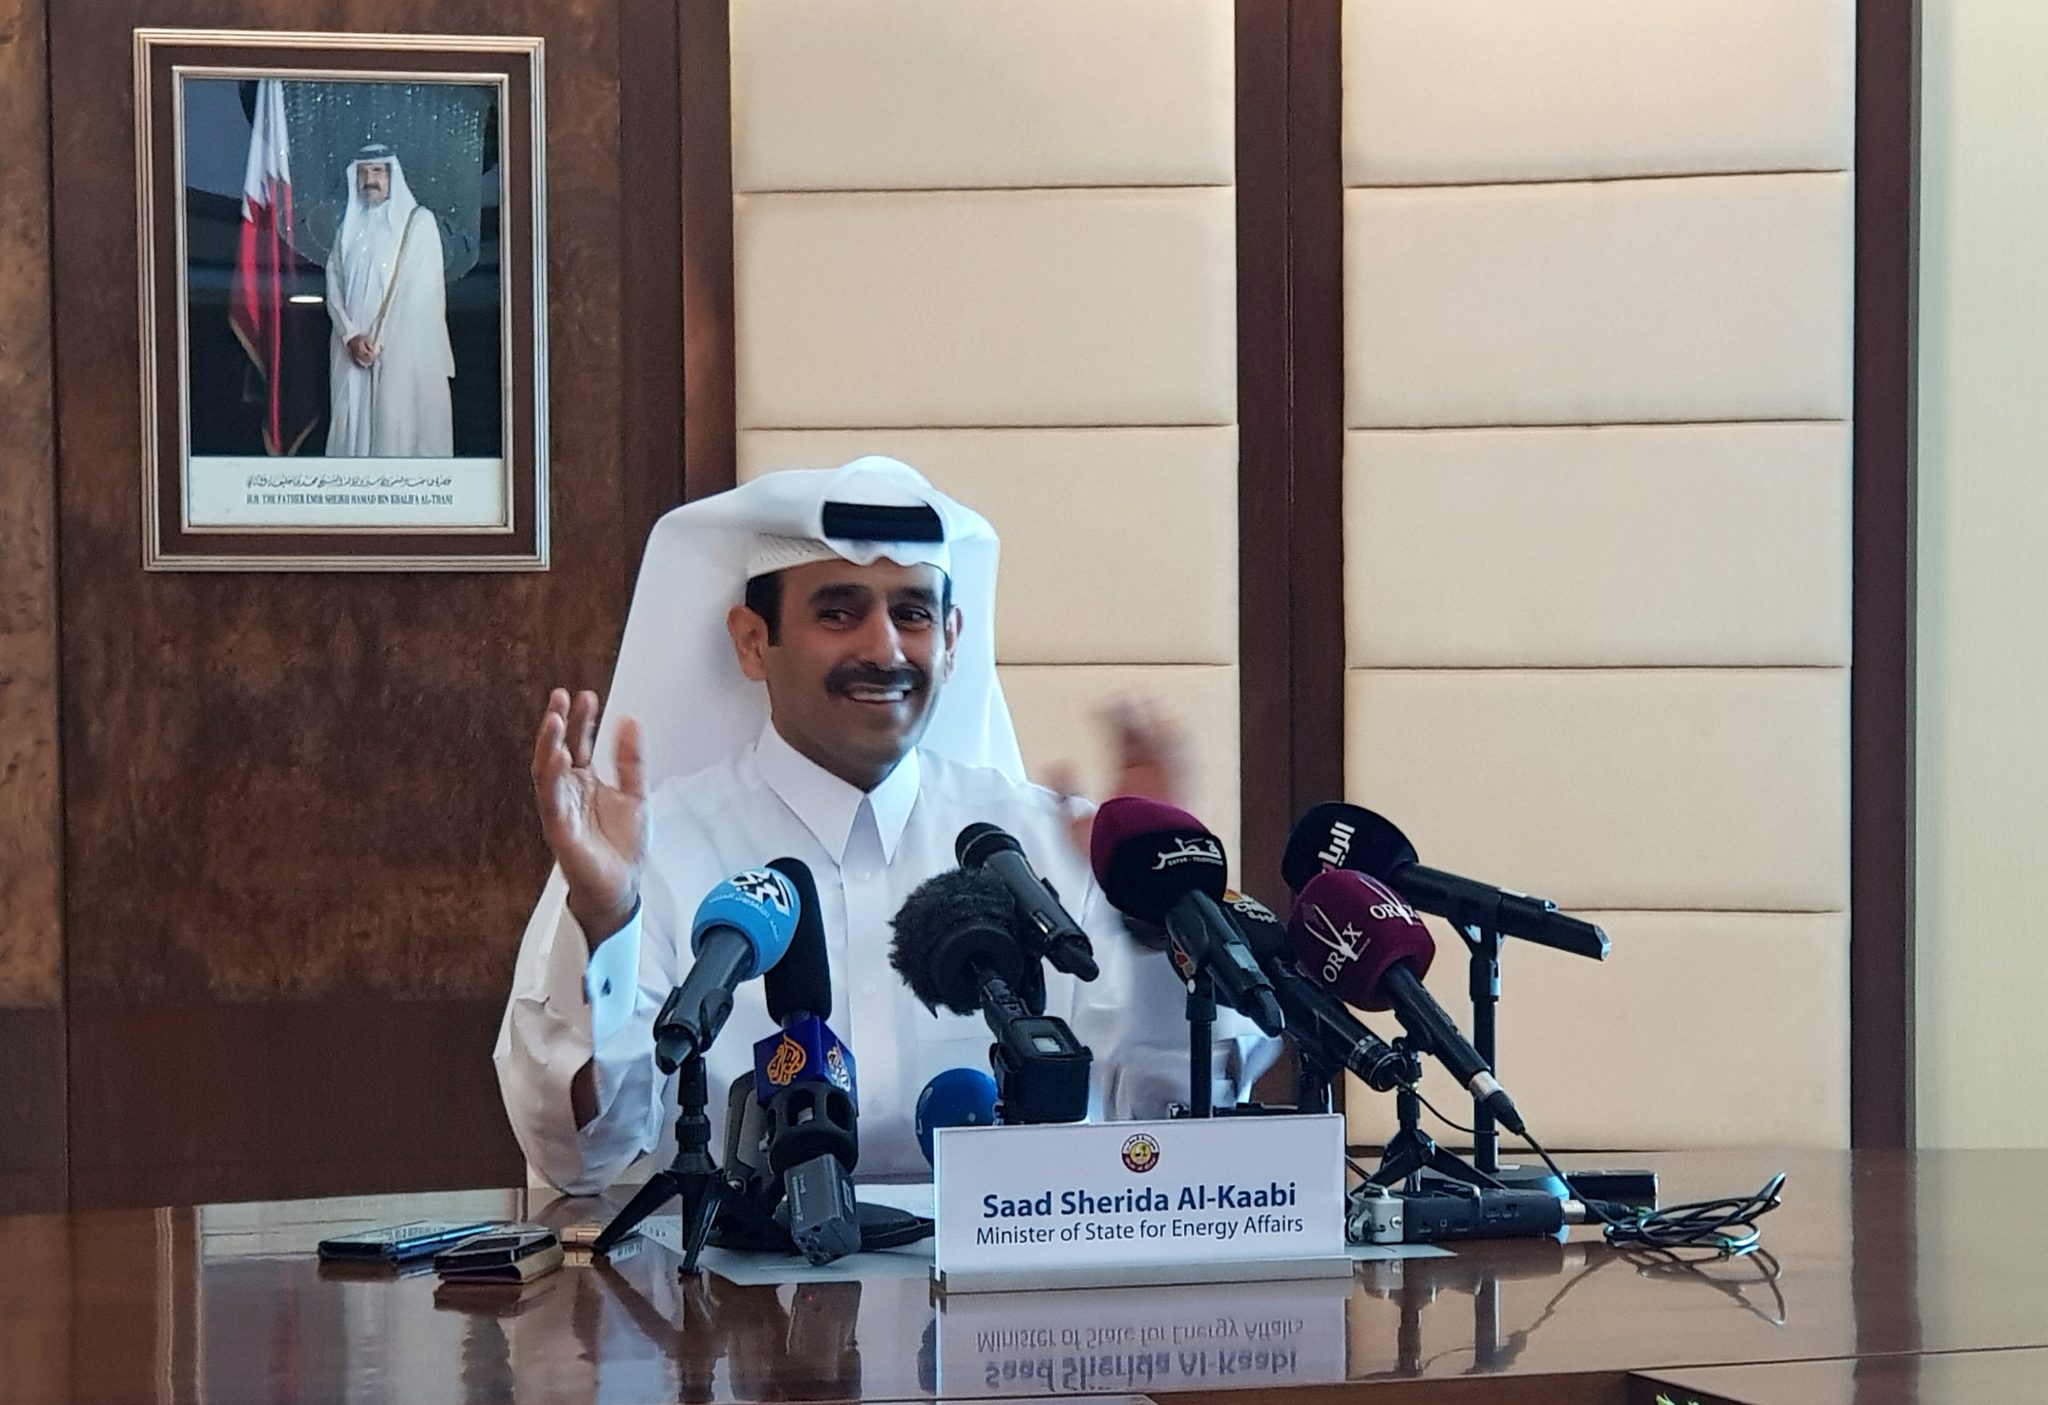 Saad al-Kaabi, Minister of State for Energy Affairs, speaks during a news conference in Doha, Qatar, December 3, 2018. REUTERS/Eric Knecht - RC1FCBB9E840